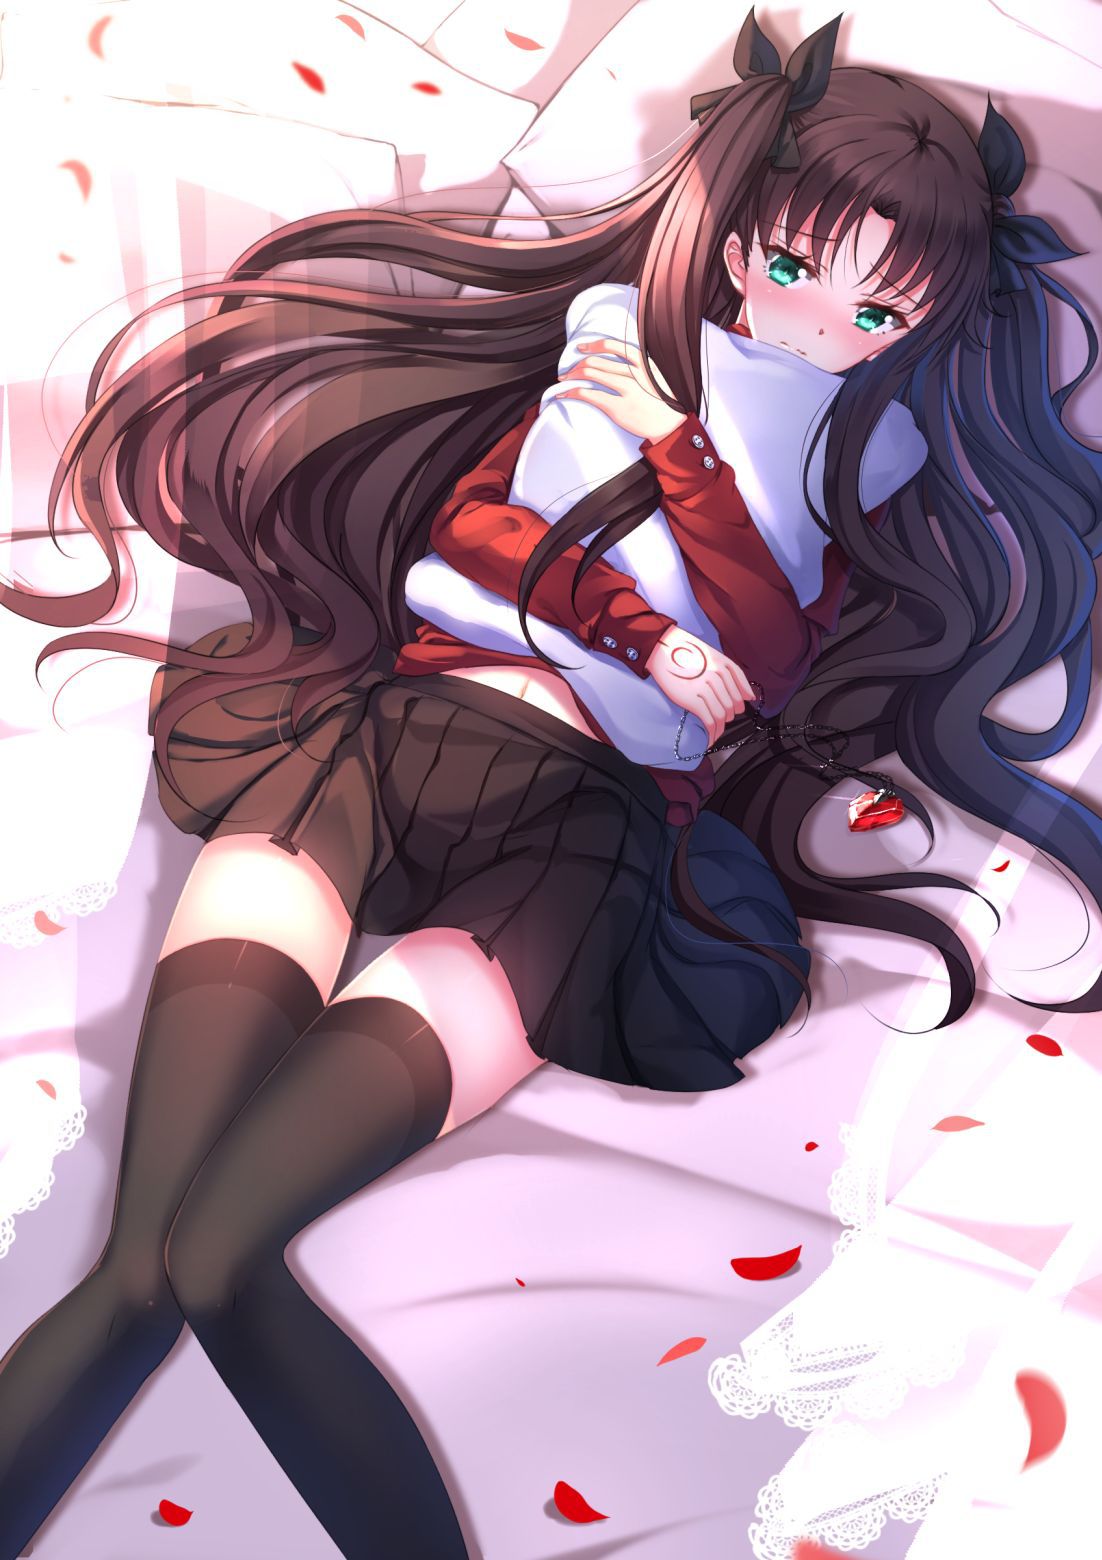 [Secondary] Fate/stay night tsundere inadvertently daughter, Rin tosaka Rin-CHAN's erotic pictures! No.04 [22 p] 22